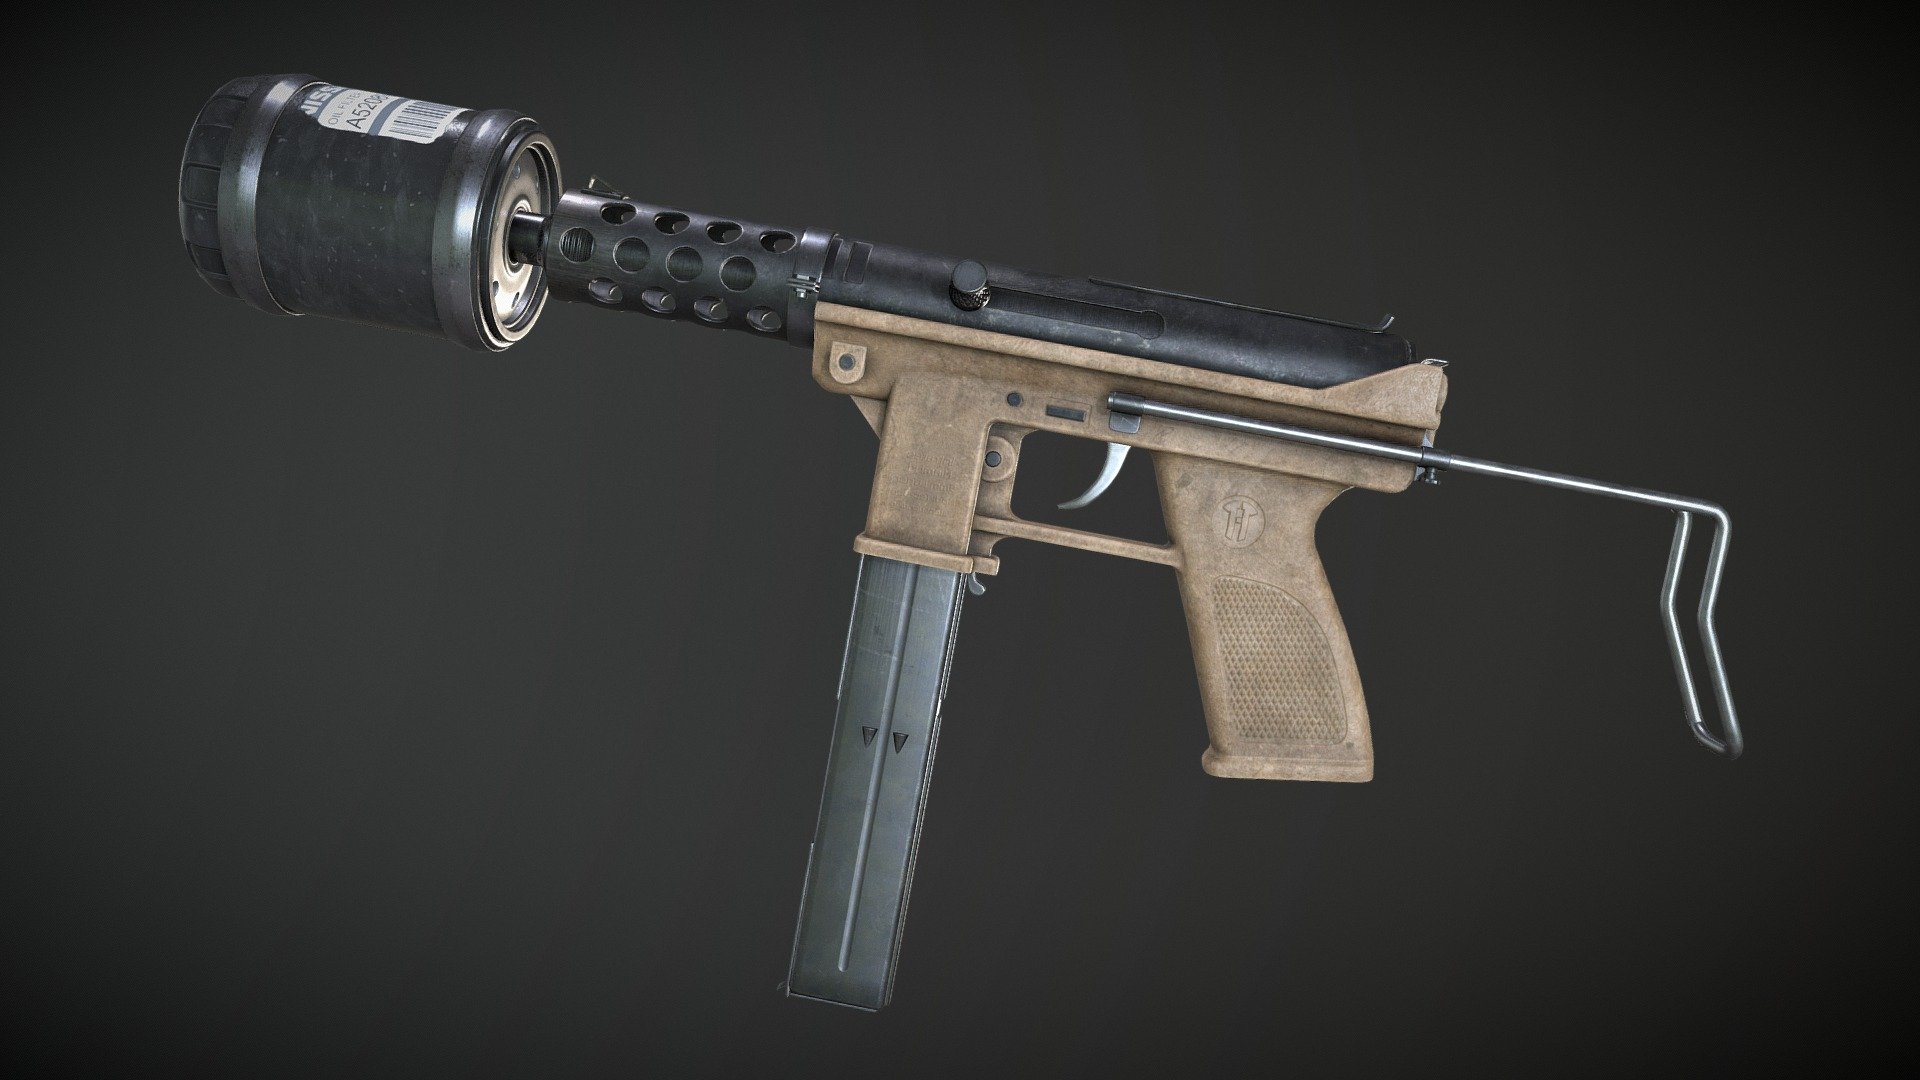 A game ready postapocalyptic Tec-9 with an Oil-Filter as a silencer substitute.

If other file formats are needed, send me a message 3d model